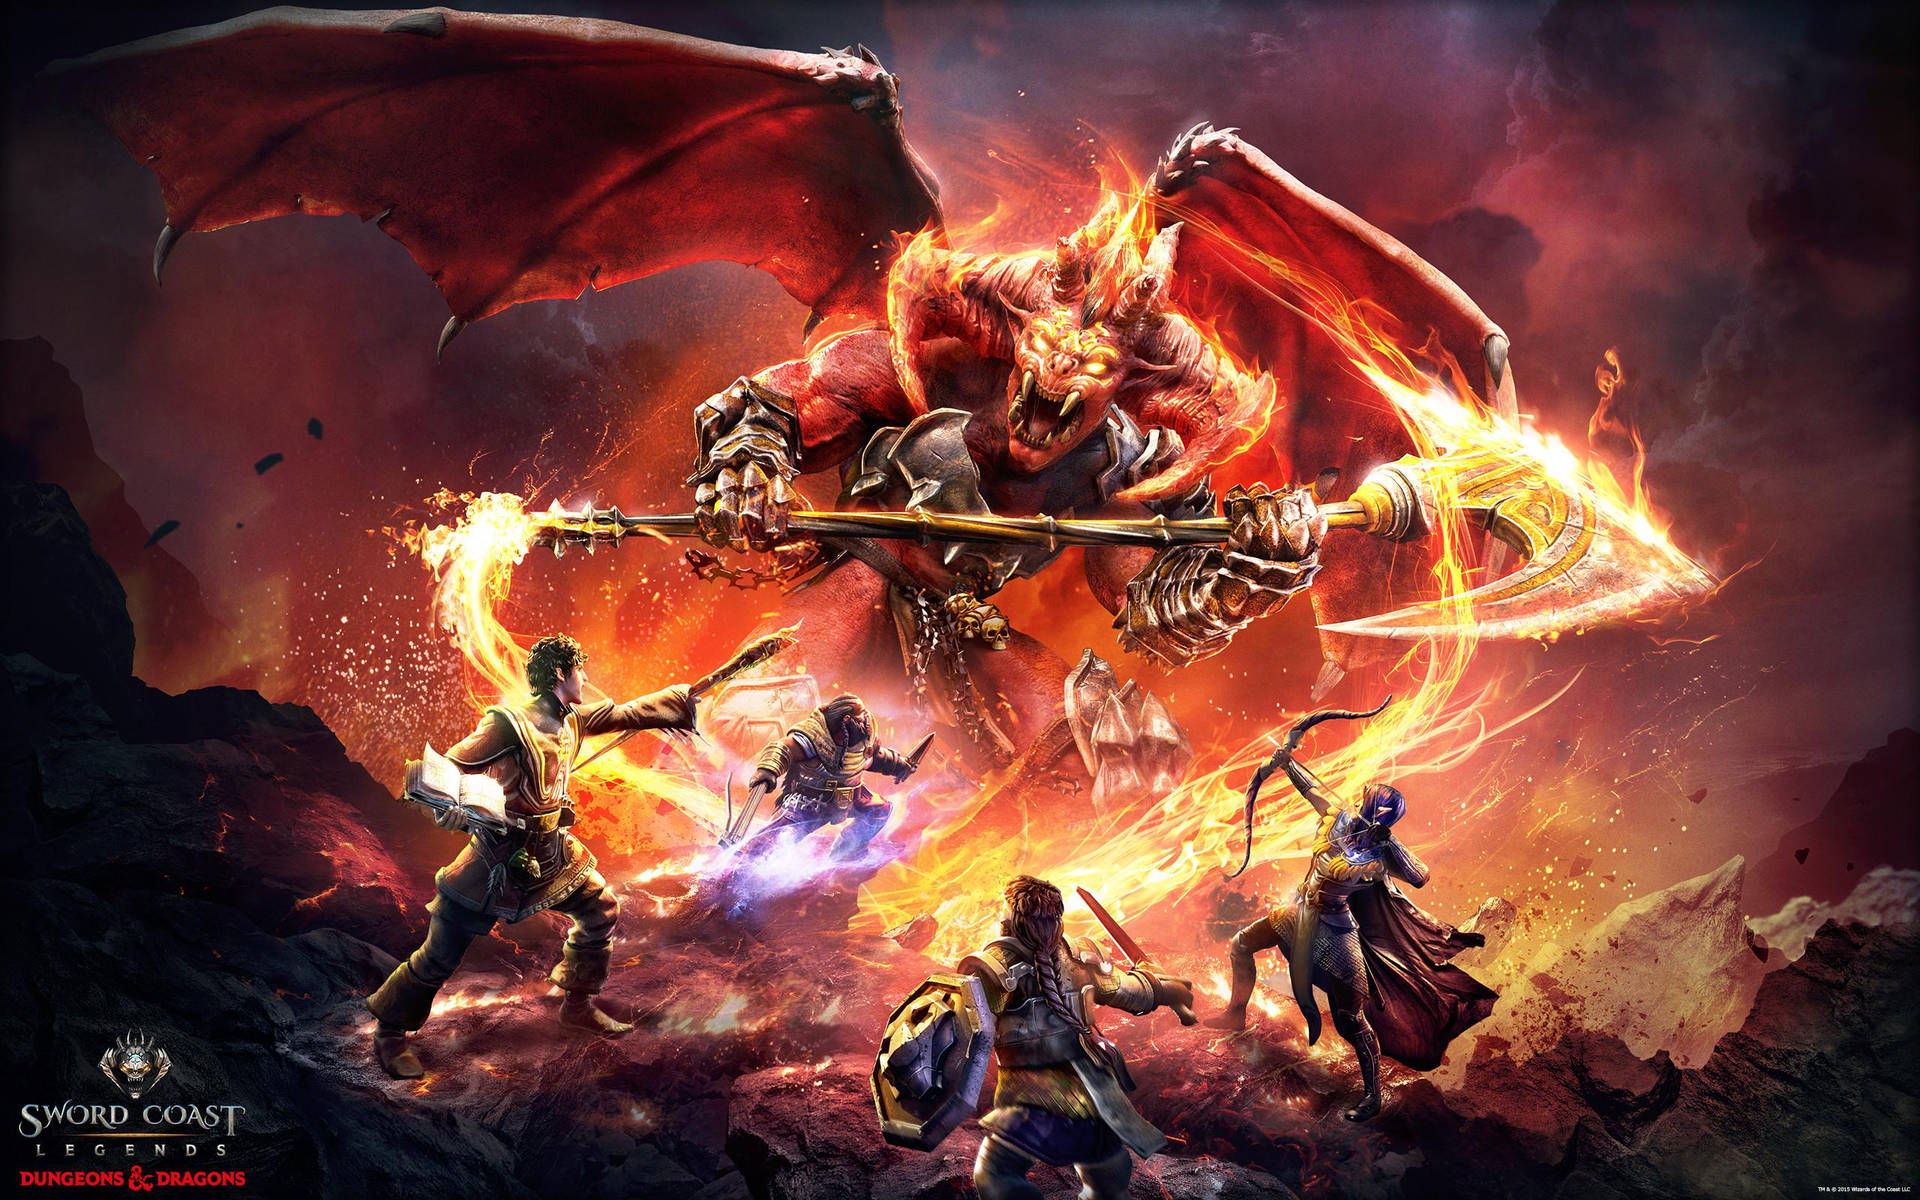 Share more than 72 dungeons and dragons wallpaper best - in.cdgdbentre